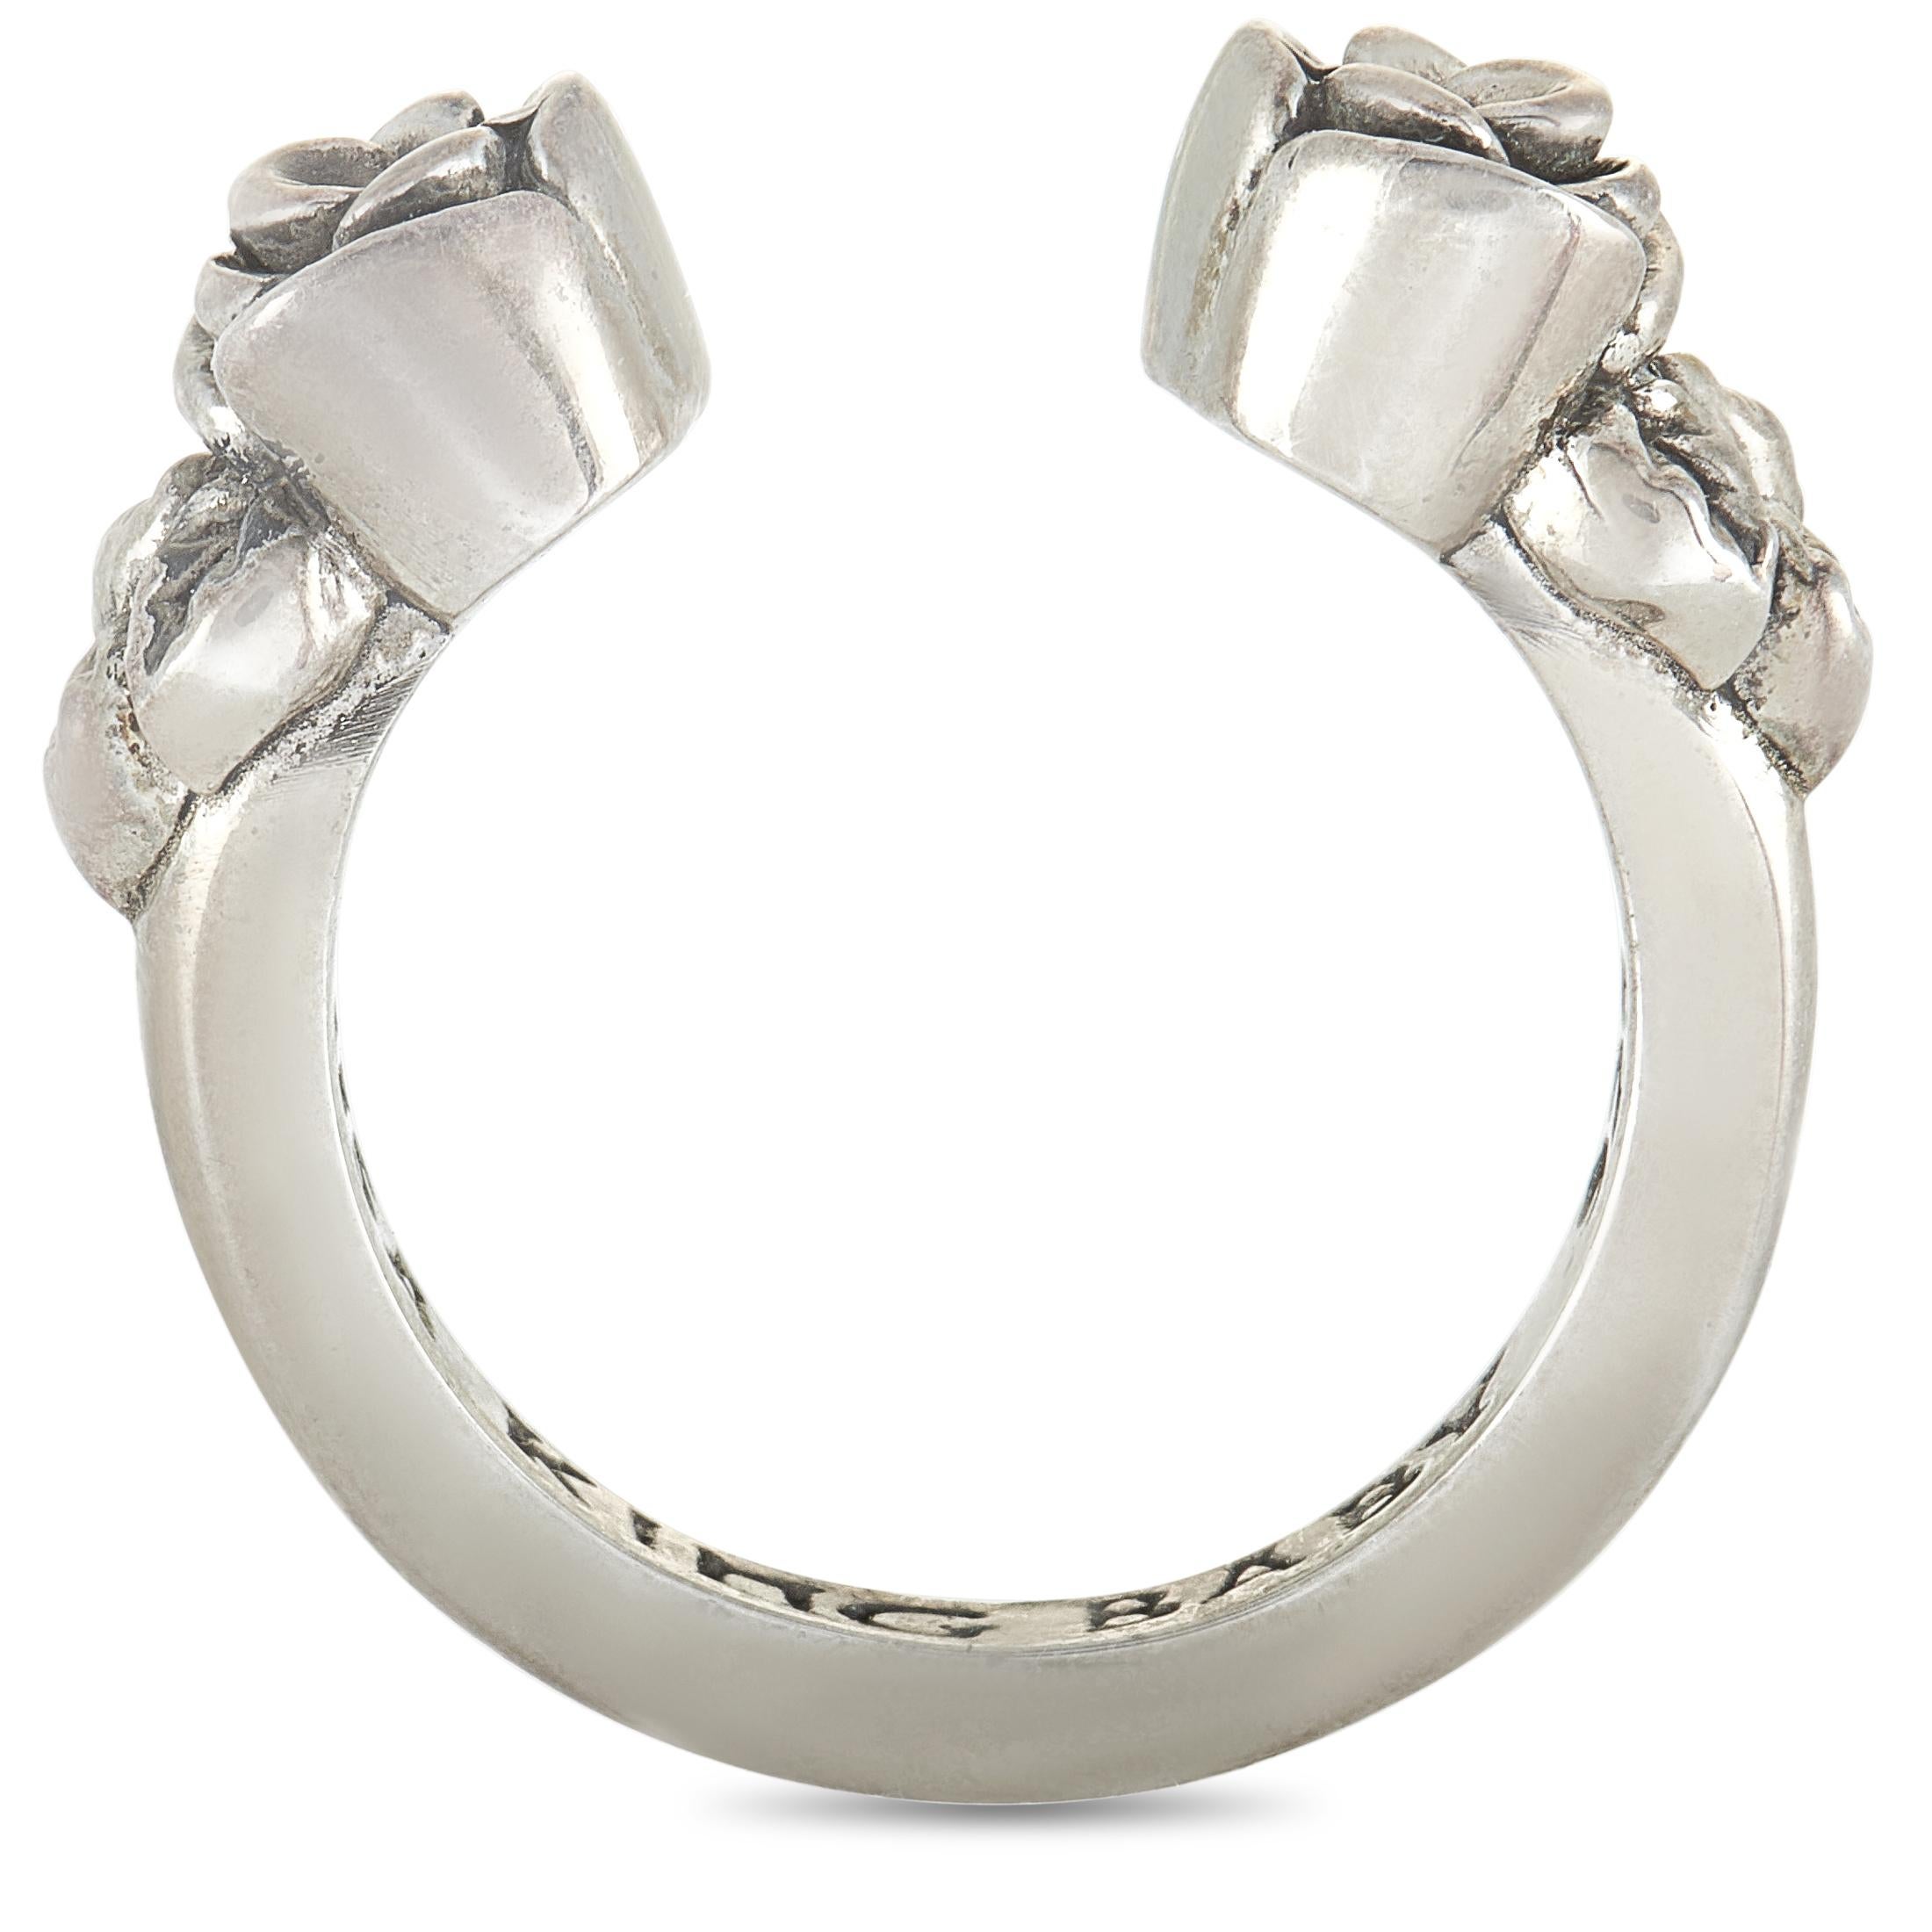 This King Baby open ring is crafted from sterling silver and weighs 7 grams. The ring boasts band thickness of 2 mm and top height of 6 mm, while top dimensions measure 23 by 6 mm.

Offered in brand new condition, this item includes the